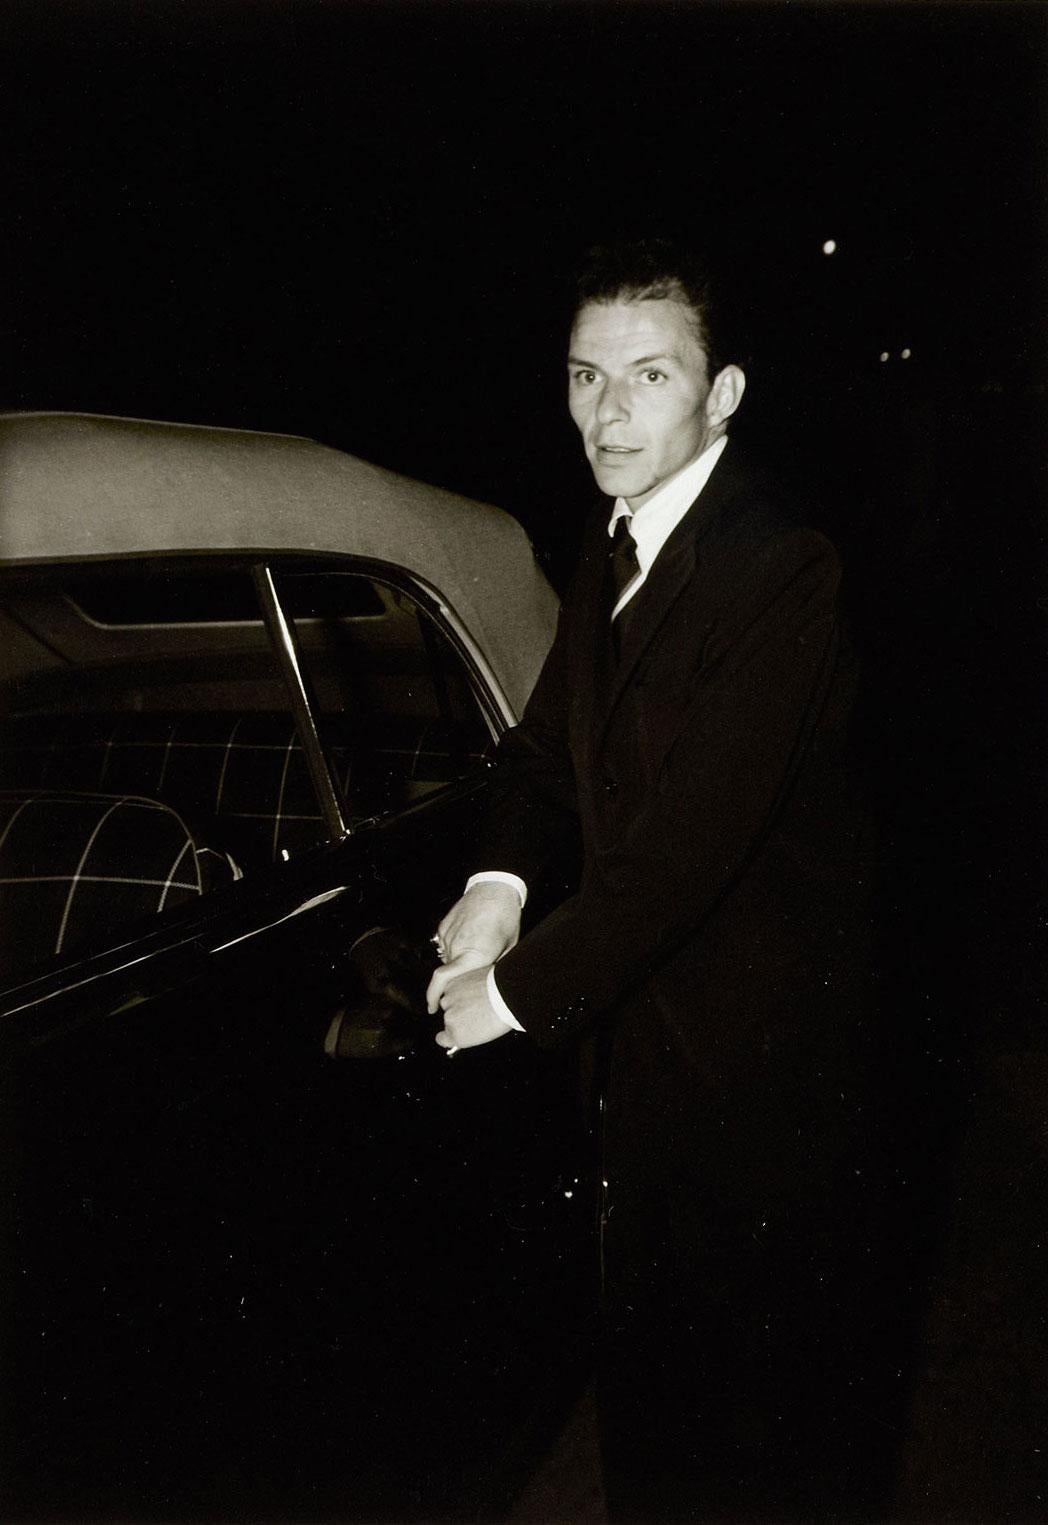 Unknown Black and White Photograph - Frank Sinatra Heading Home - Estate Stamped